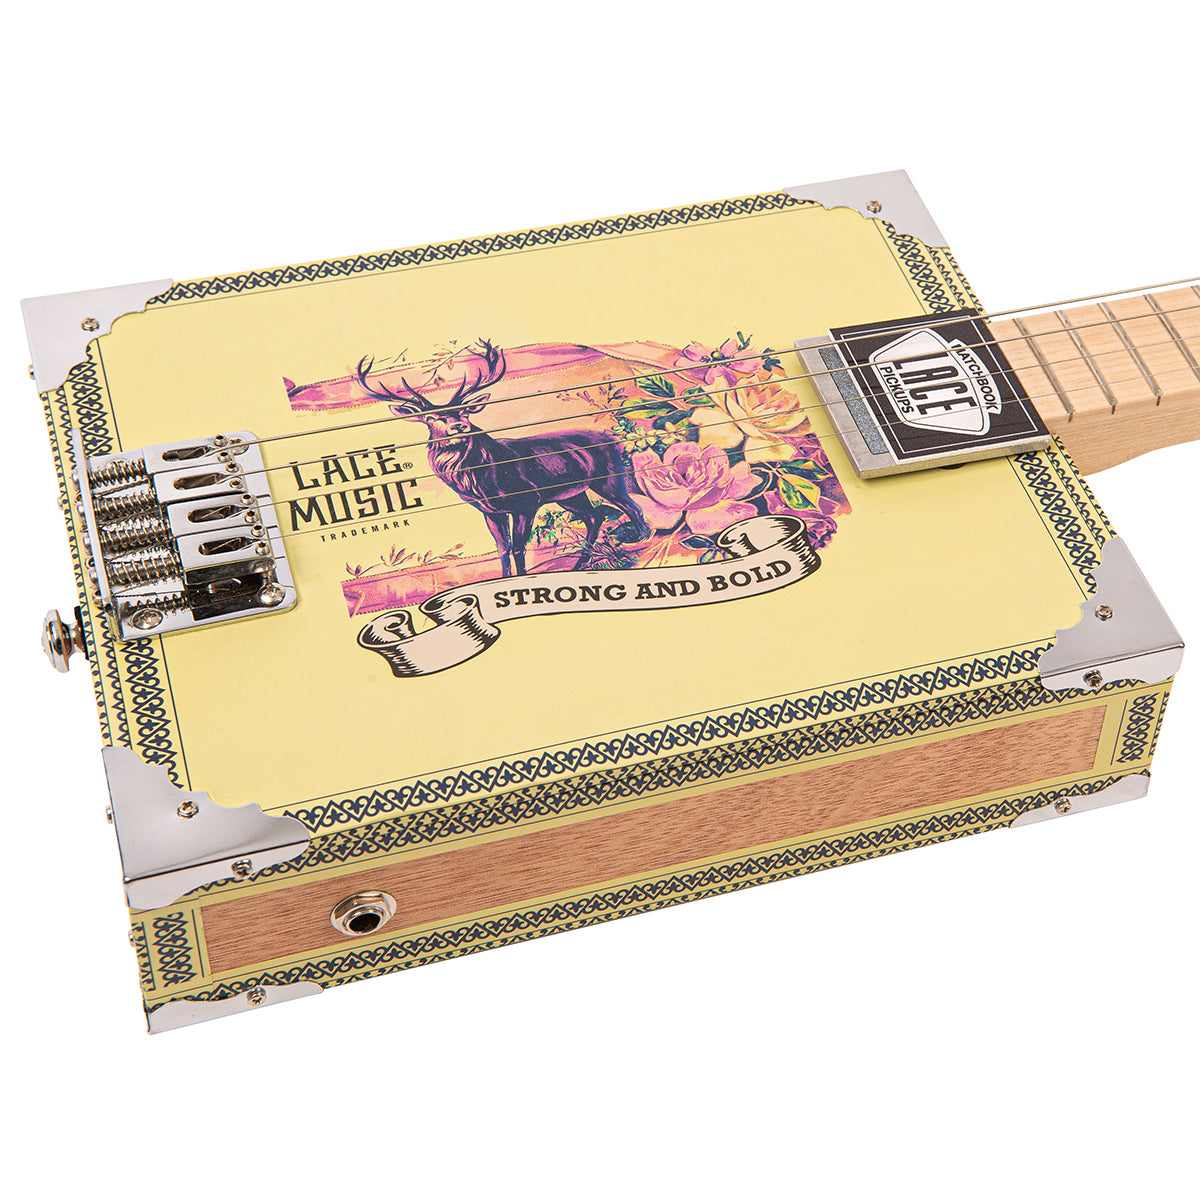 Lace Cigar Box Electric Guitar ~ 4 String ~ Deer Crossing, Electric Guitars for sale at Richards Guitars.